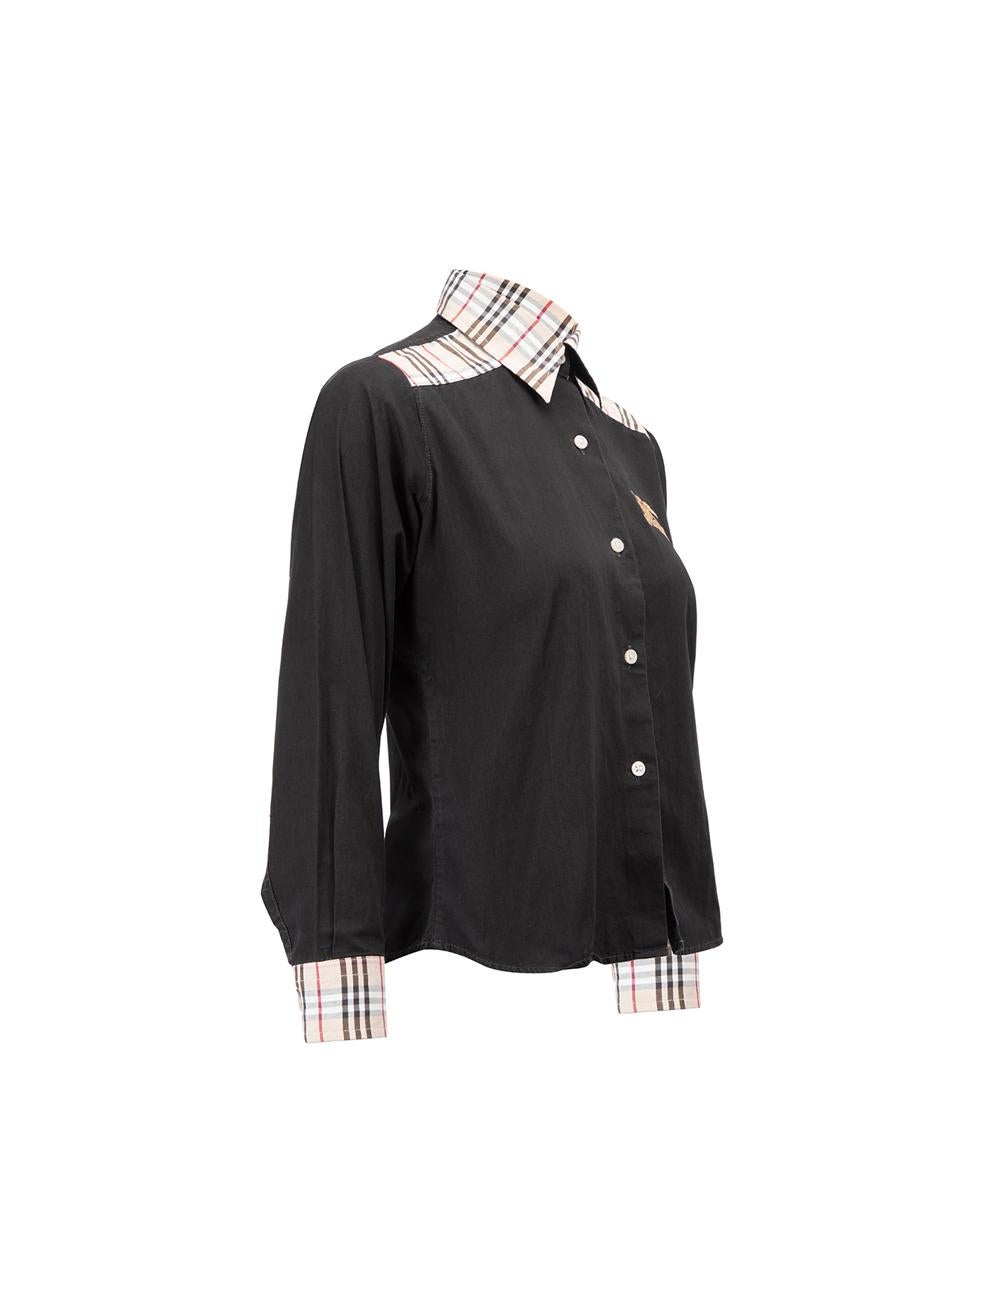 CONDITION is Very good. Hardly any visible wear to shirt is evident on this used Burberry designer resale item.



Details


Black

Cotton

Long sleeves shirt

Tartan contrast trimmings

Front button up closure

Logo embroidered

Buttoned